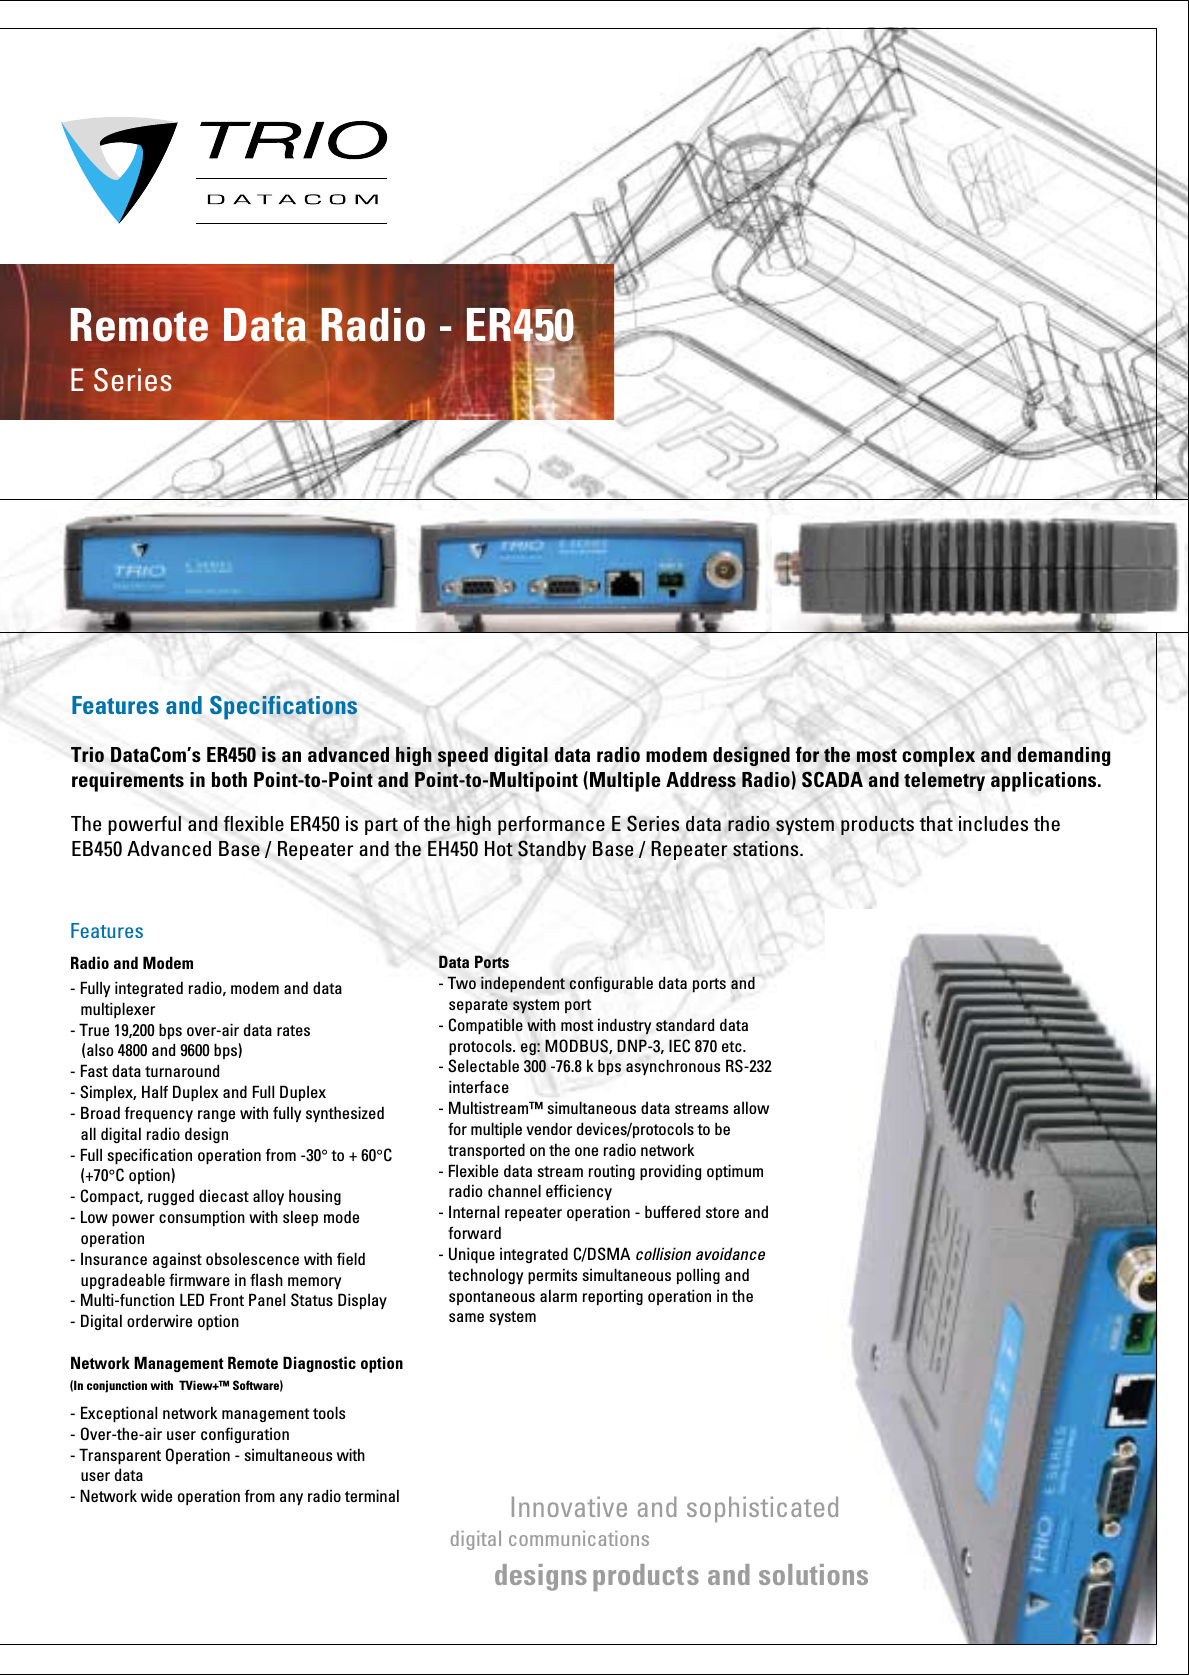 Features and SpecificationsTrio DataCom’s ER450 is an advanced high speed digital data radio modem designed for the most complex and demanding requirements in both Point-to-Point and Point-to-Multipoint (Multiple Address Radio) SCADA and telemetry applications.The powerful and flexible ER450 is part of the high performance E Series data radio system products that includes the EB450 Advanced Base / Repeater and the EH450 Hot Standby Base / Repeater stations.E SeriesRemote Data Radio - ER450 FeaturesRadio and Modem- Fully integrated radio, modem and data     multiplexer- True 19,200 bps over-air data rates    (also 4800 and 9600 bps) - Fast data turnaround- Simplex, Half Duplex and Full Duplex - Broad frequency range with fully synthesized    all digital radio design- Full specification operation from -30° to + 60°C  (+70°C option)- Compact, rugged diecast alloy housing- Low power consumption with sleep mode    operation- Insurance against obsolescence with field   upgradeable firmware in flash memory- Multi-function LED Front Panel Status Display- Digital orderwire option Network Management Remote Diagnostic option(In conjunction with  TView+™ Software)- Exceptional network management tools- Over-the-air user configuration- Transparent Operation - simultaneous with   user data- Network wide operation from any radio terminal Data Ports- Two independent configurable data ports and   separate system port- Compatible with most industry standard data   protocols. eg: MODBUS, DNP-3, IEC 870 etc.- Selectable 300 -76.8 k bps asynchronous RS-232  interface- Multistream™ simultaneous data streams allow   for multiple vendor devices/protocols to be   transported on the one radio network- Flexible data stream routing providing optimum   radio channel efficiency- Internal repeater operation - buffered store and  forward- Unique integrated C/DSMA collision avoidance    technology permits simultaneous polling and    spontaneous alarm reporting operation in the   same systemInnovative and sophisticateddigital communications designs product s and solutions